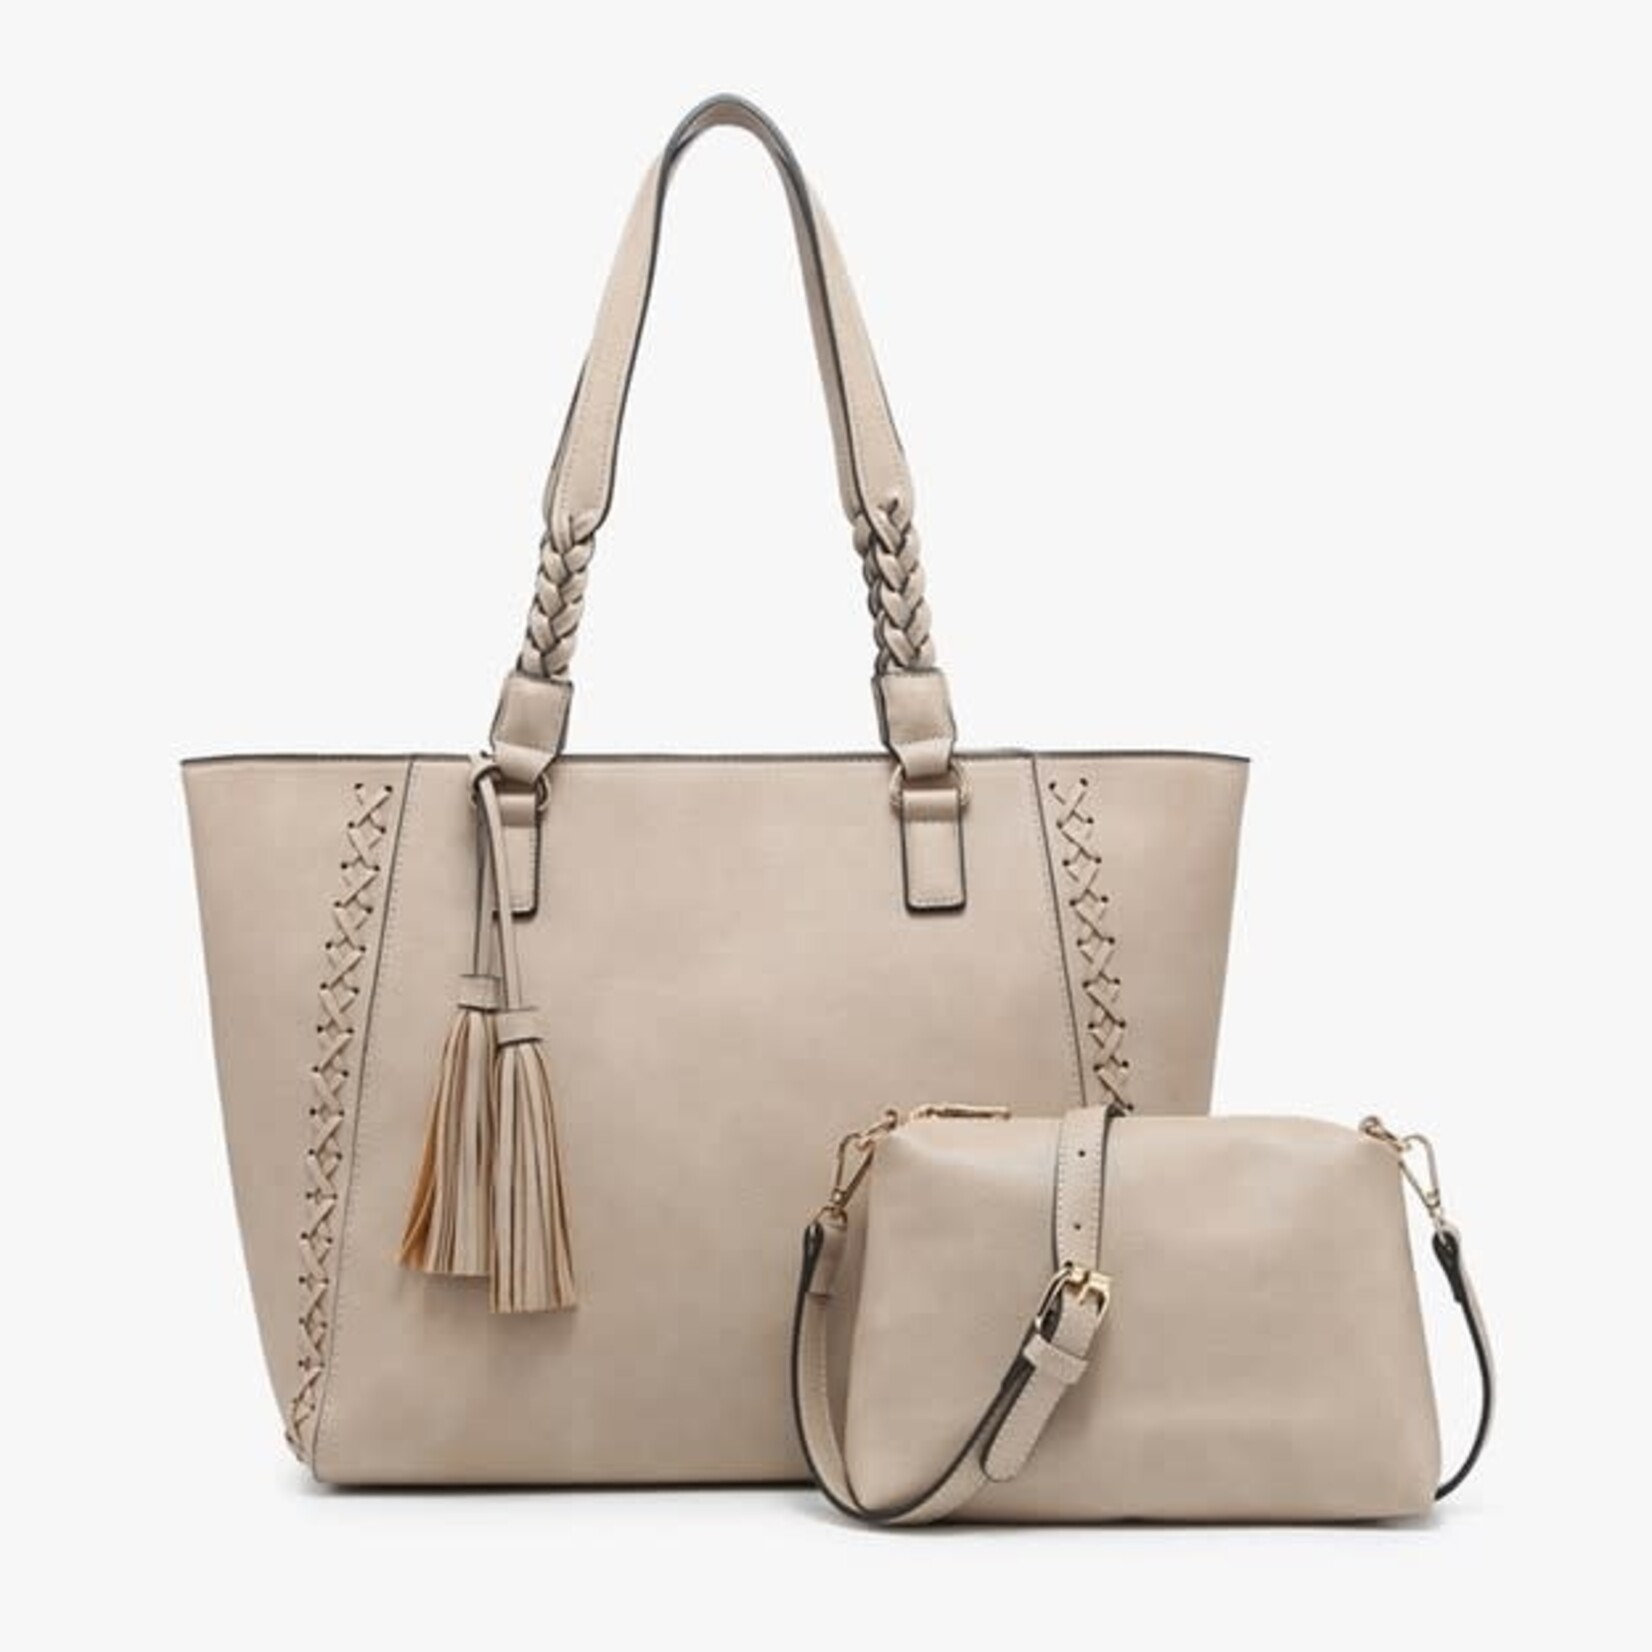 Jen & Co Lisa Structured Tote w/ Braided Accents- Sand